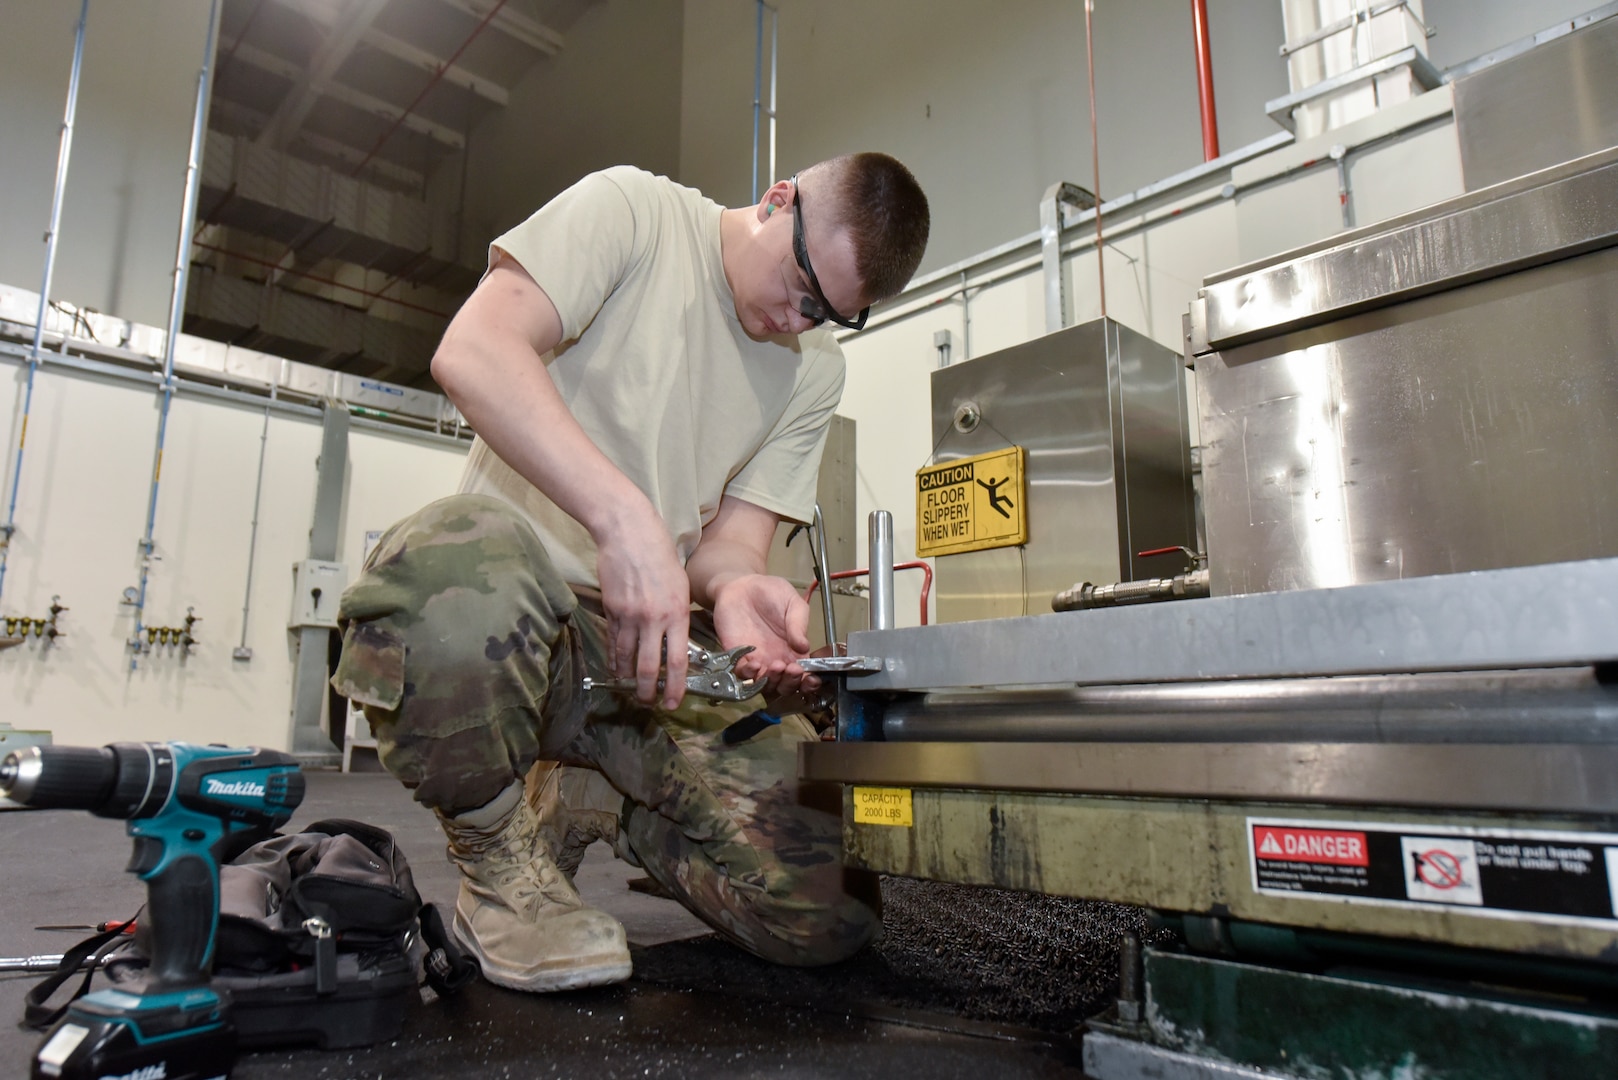 Senior Airman Justin Travis, 379th Expeditionary Maintenance Squadron metals technician, installs a bump stop on a washer grate at Al Udeid Air Base, Qatar, June 13, 2018. The bump stop serves as a mechanism to prevent the grate from extending past a certain point when servicing aircraft wheels. (U.S. Air Force photo by Staff Sgt. Enjoli Saunders)